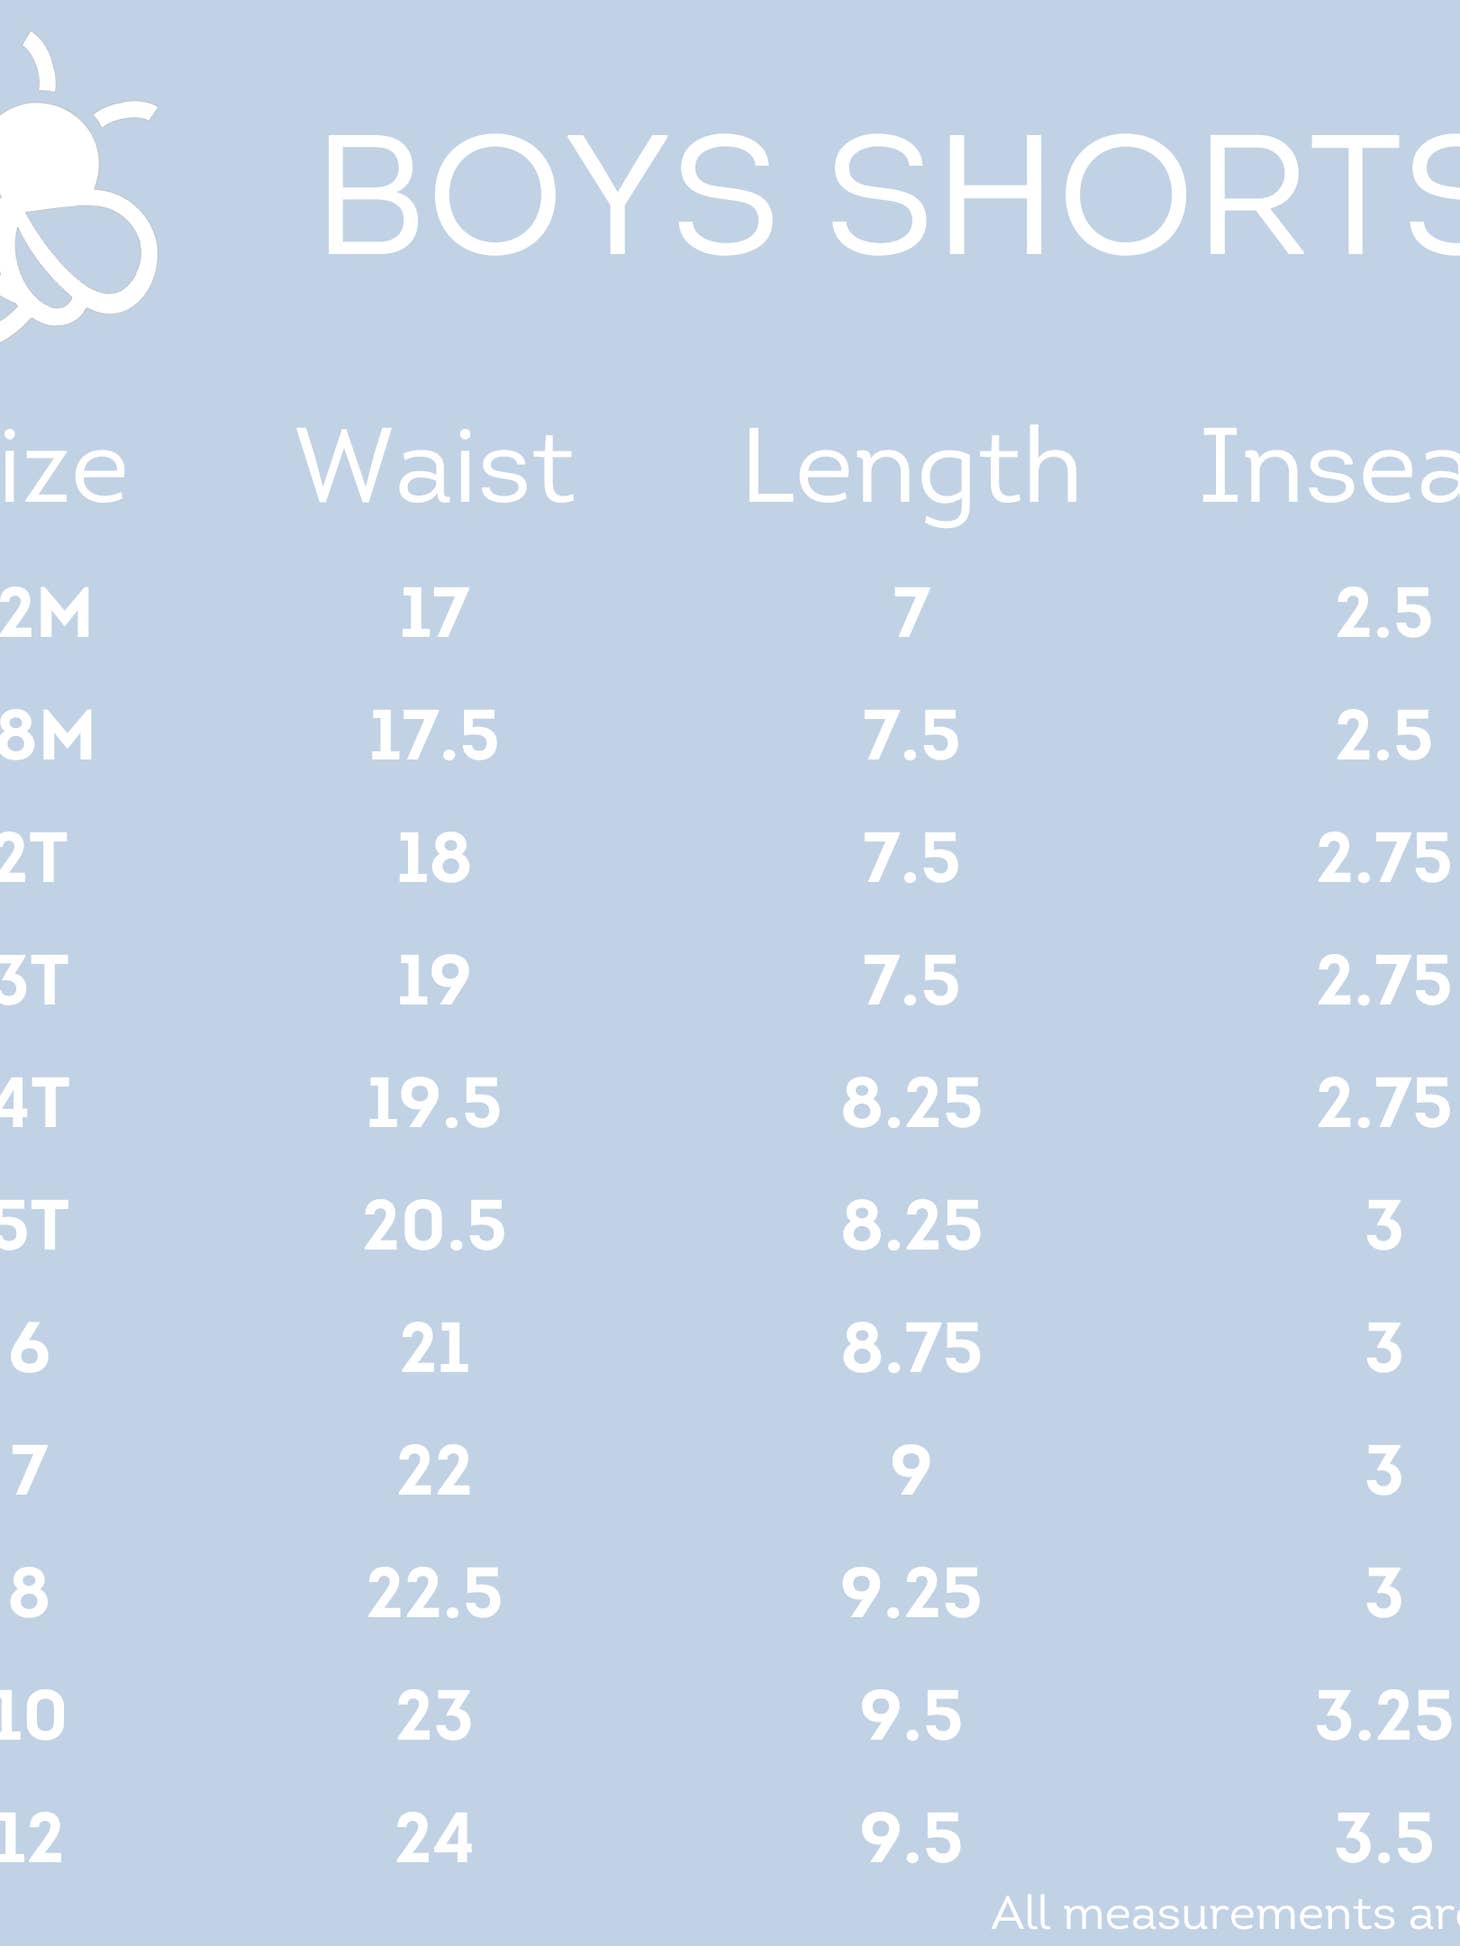 A baby's height chart for Sugar Bee Clothing's Chambray Boys Shorts.